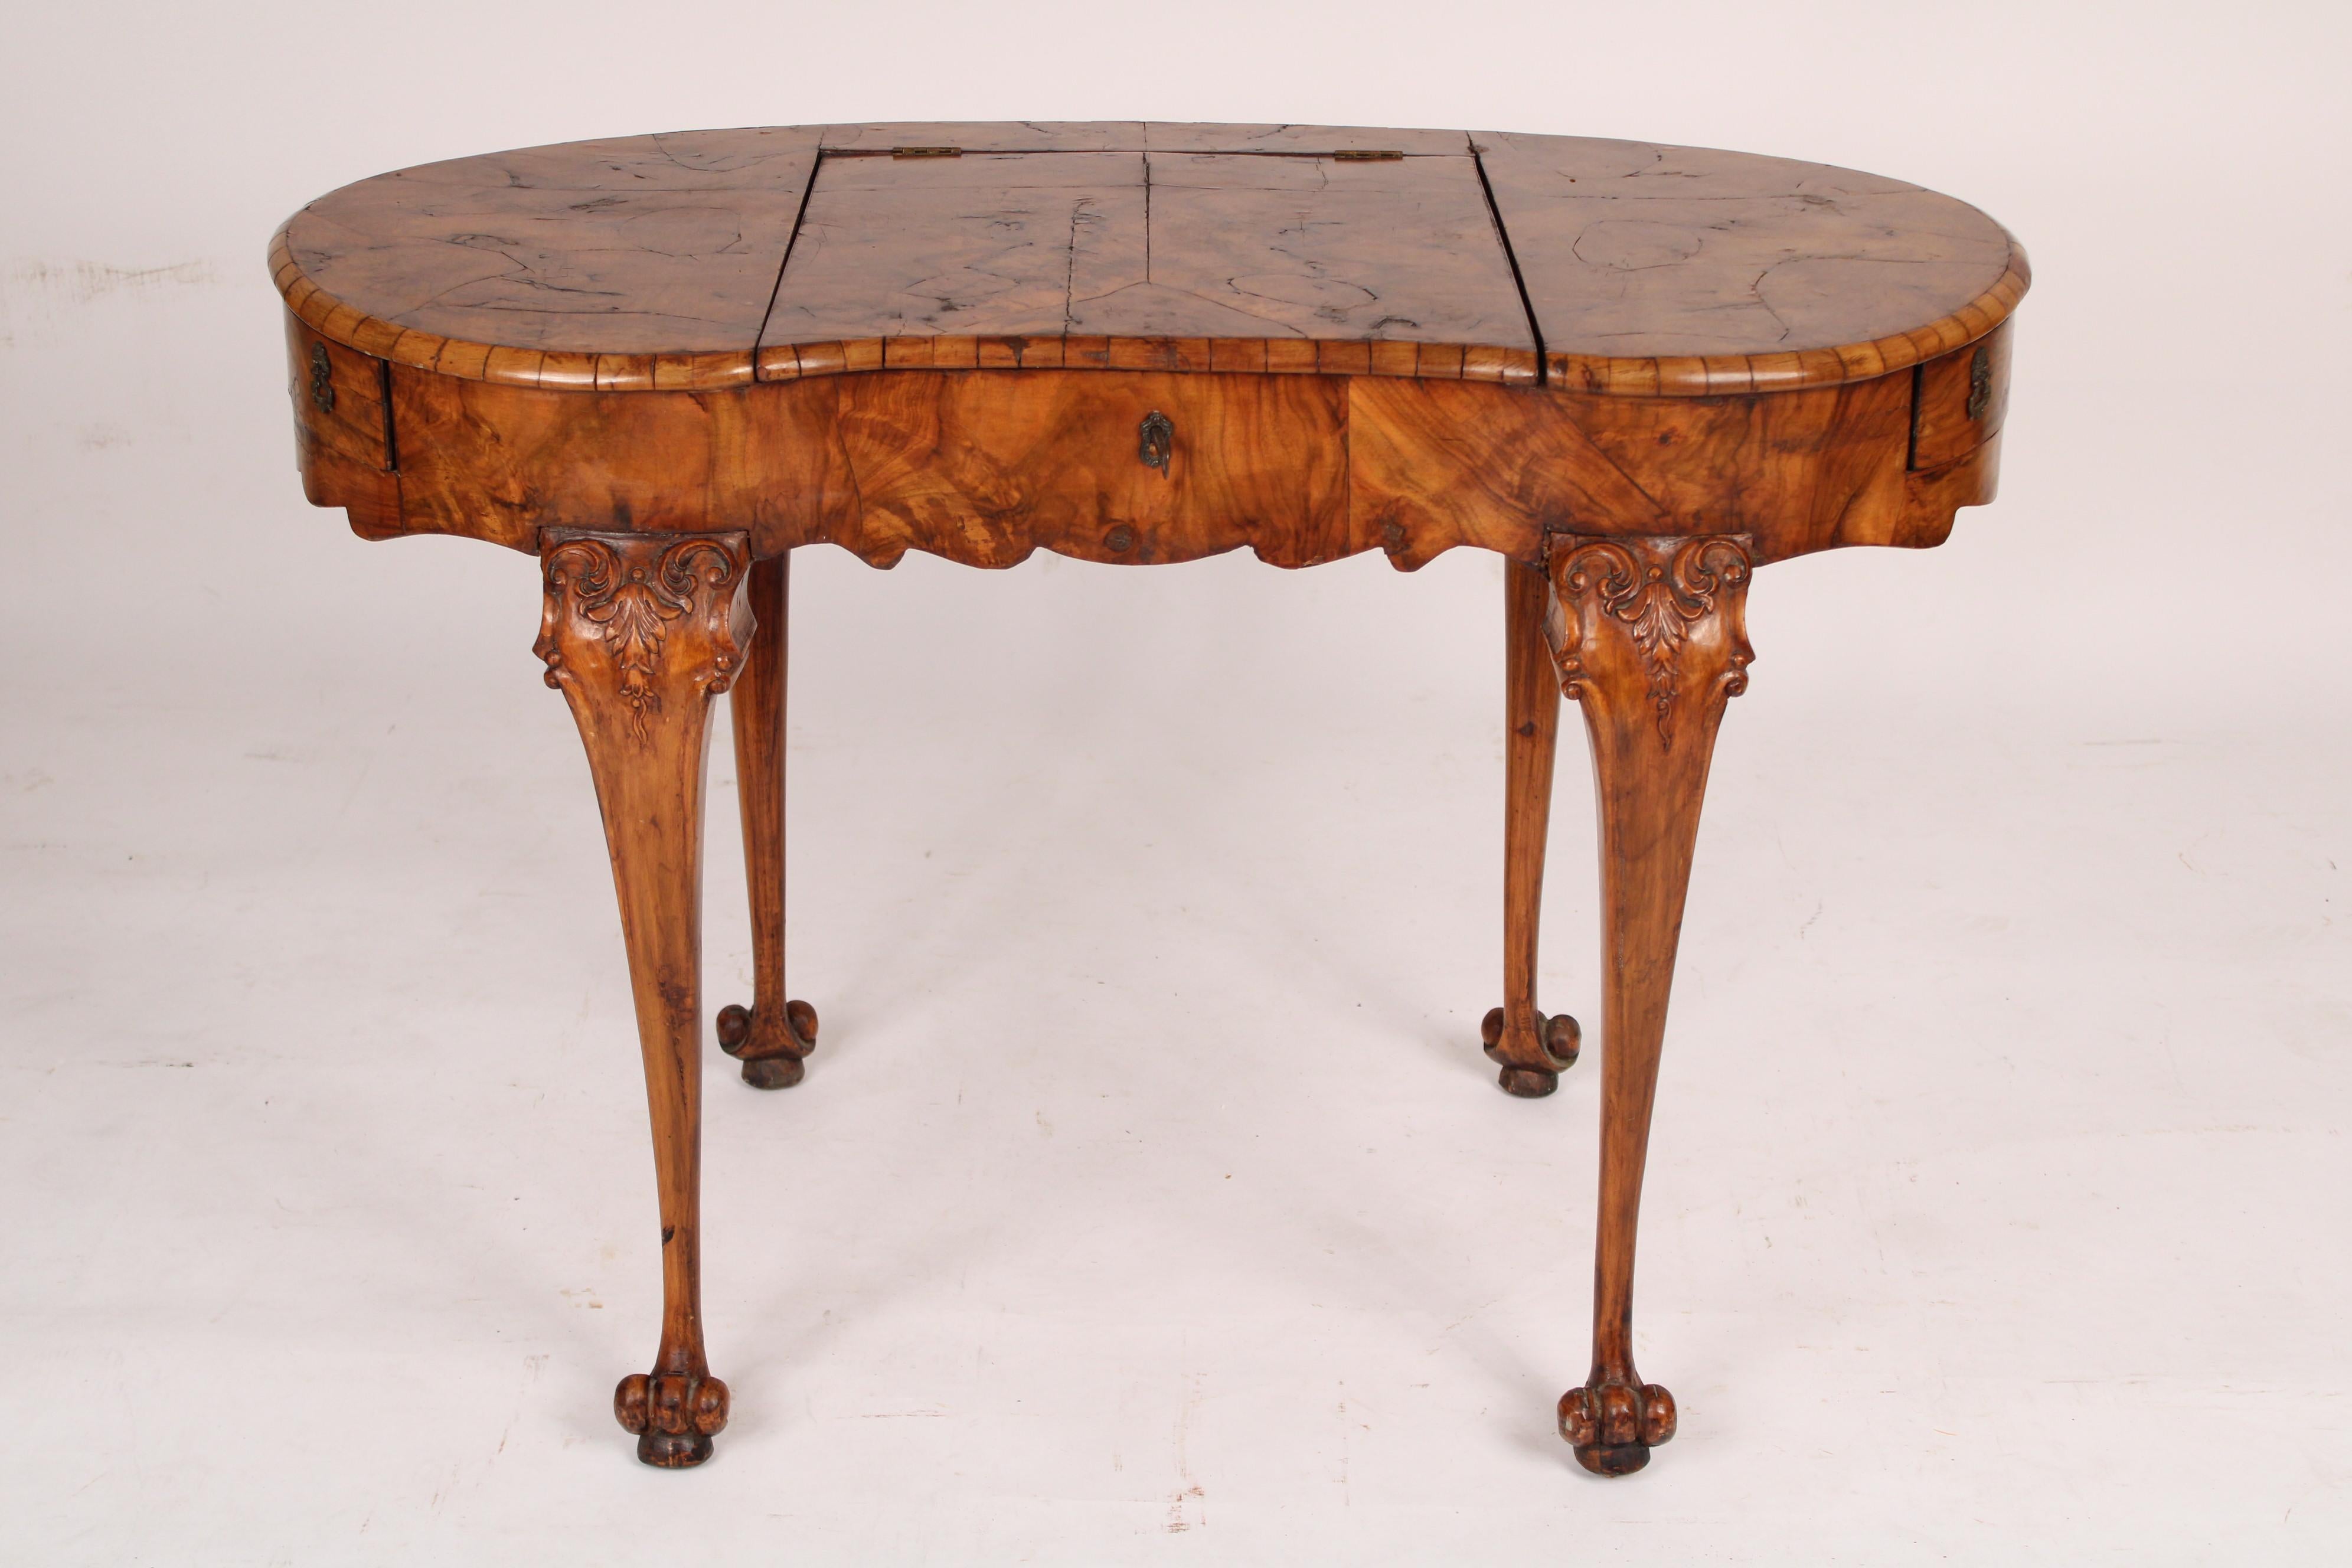 Antique Continental Louis XV style burl olive wood kidney shaped writing / poudre table, late 19th century. Kidney shaped top with center area with mirror that rises to be used as a vanity, frieze with scalloped apron and side drawers that open,